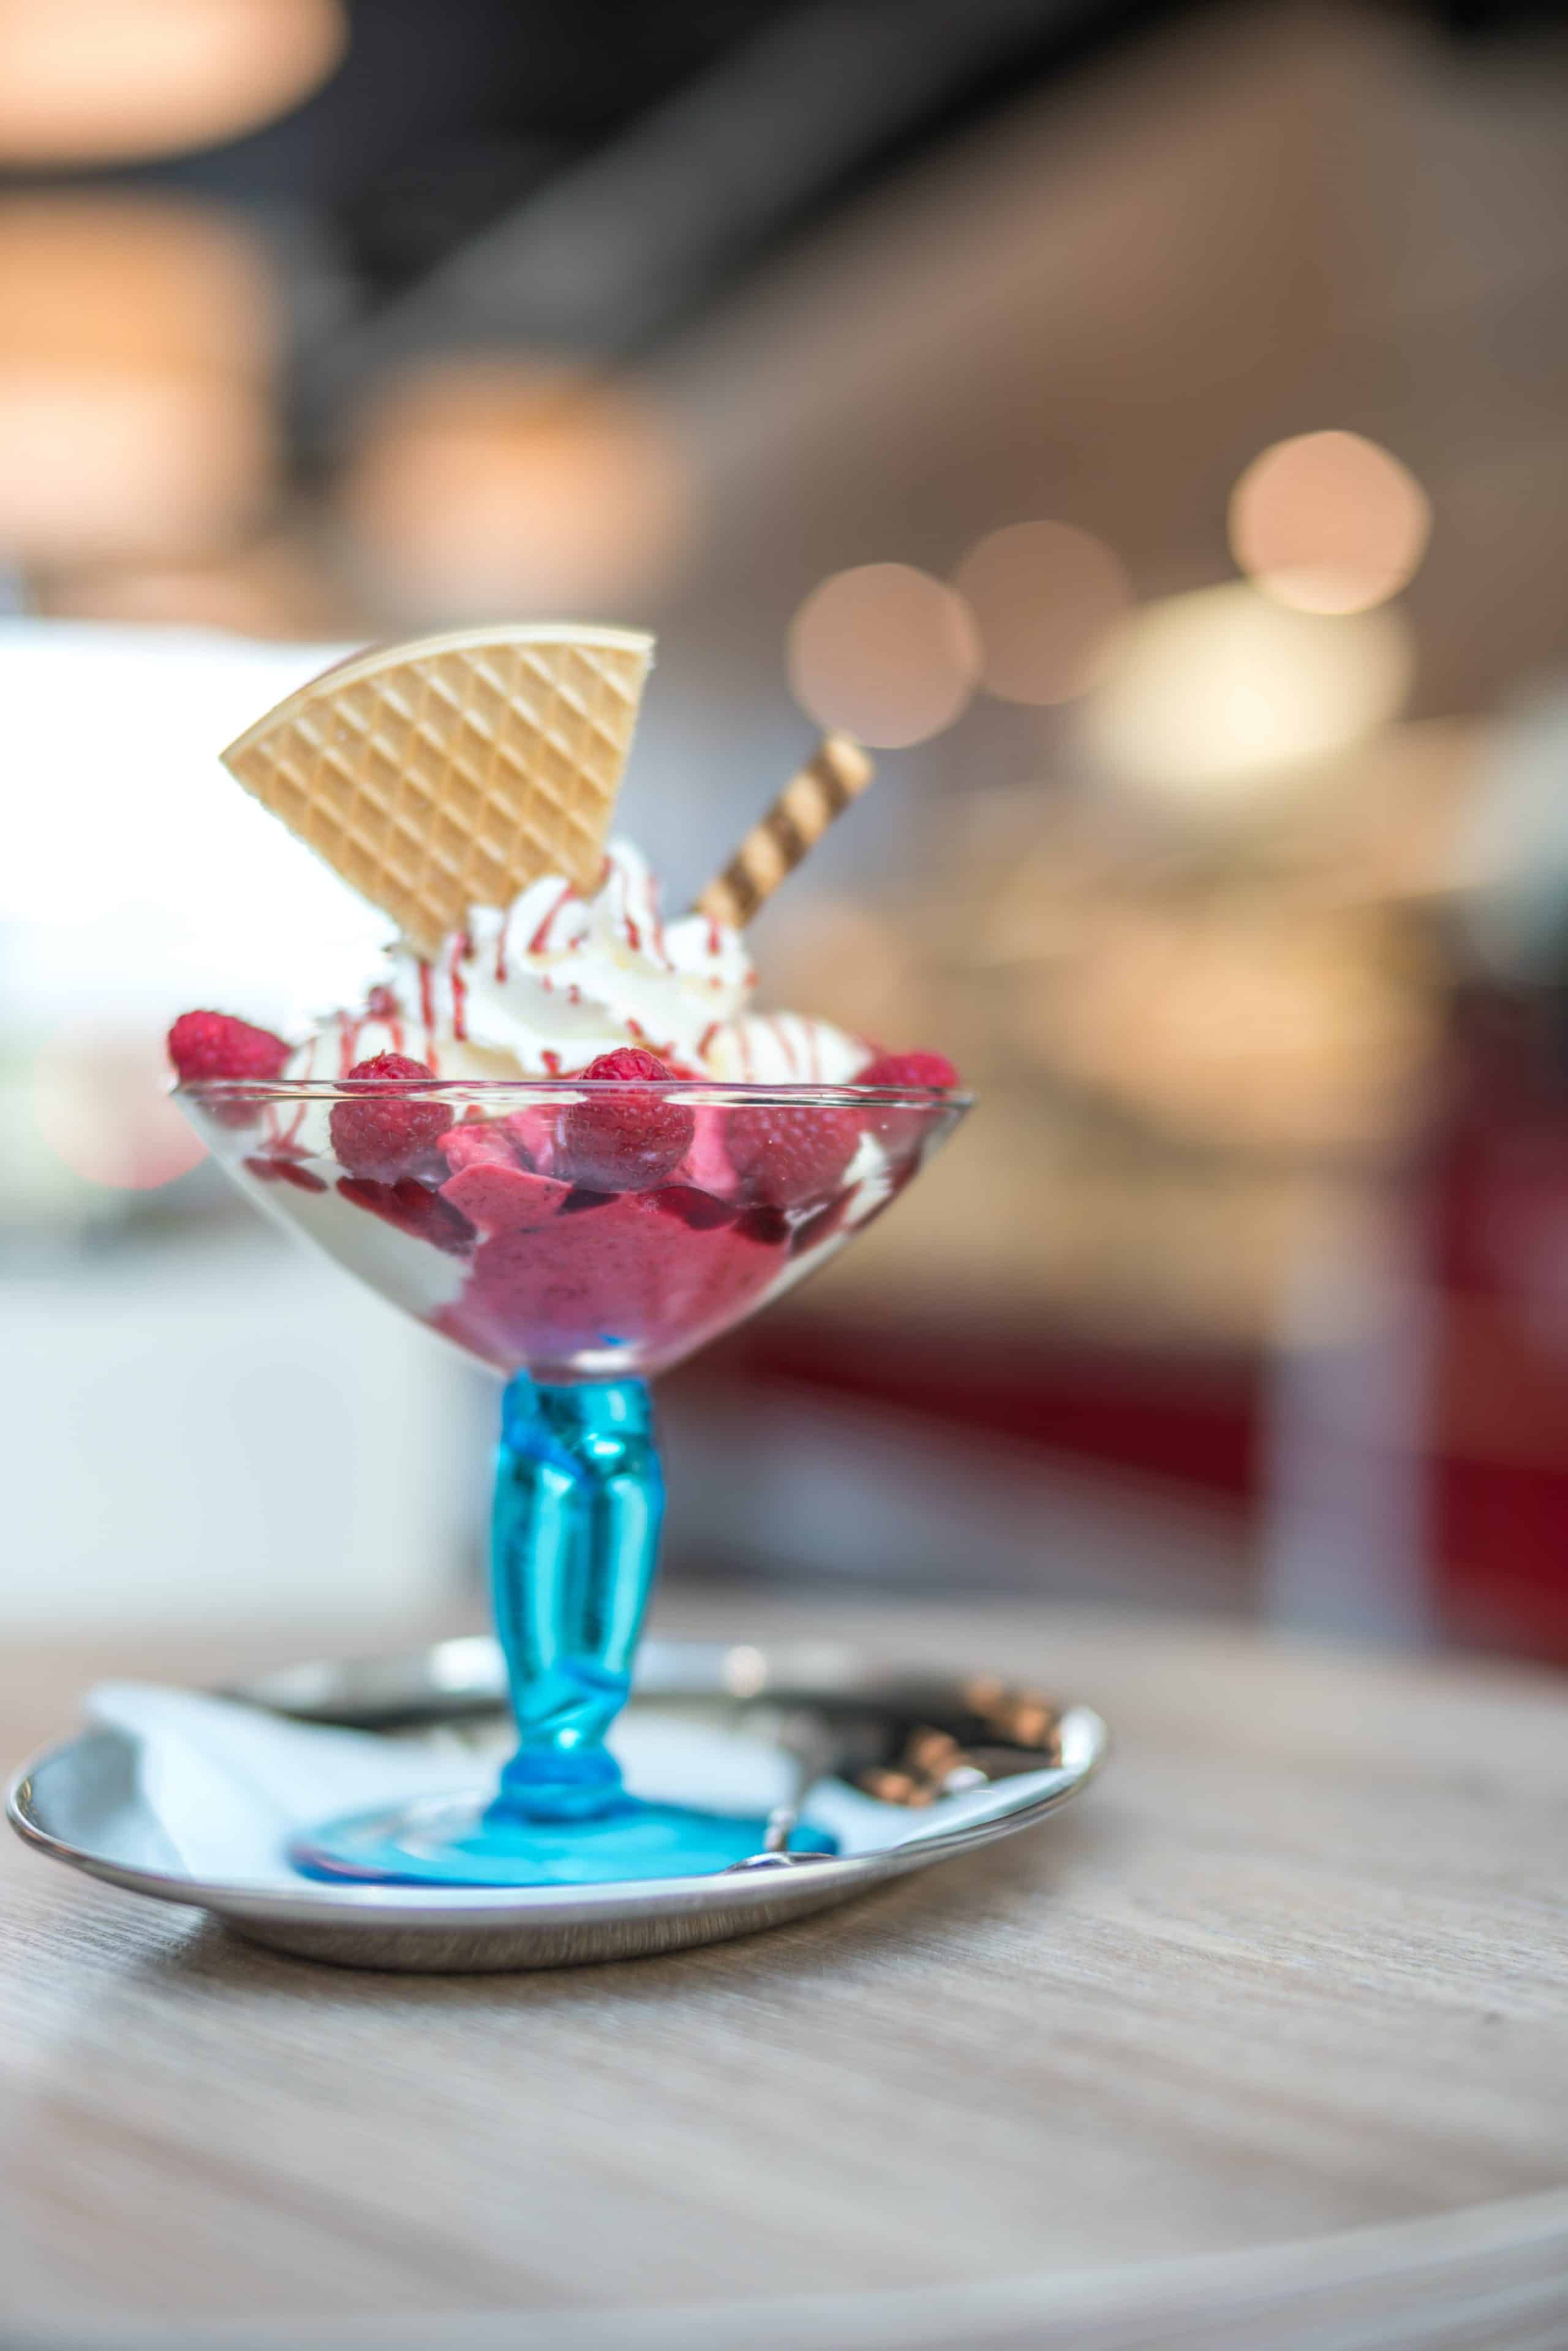 elegant ice cream dish with raspberry sorbet and toppings